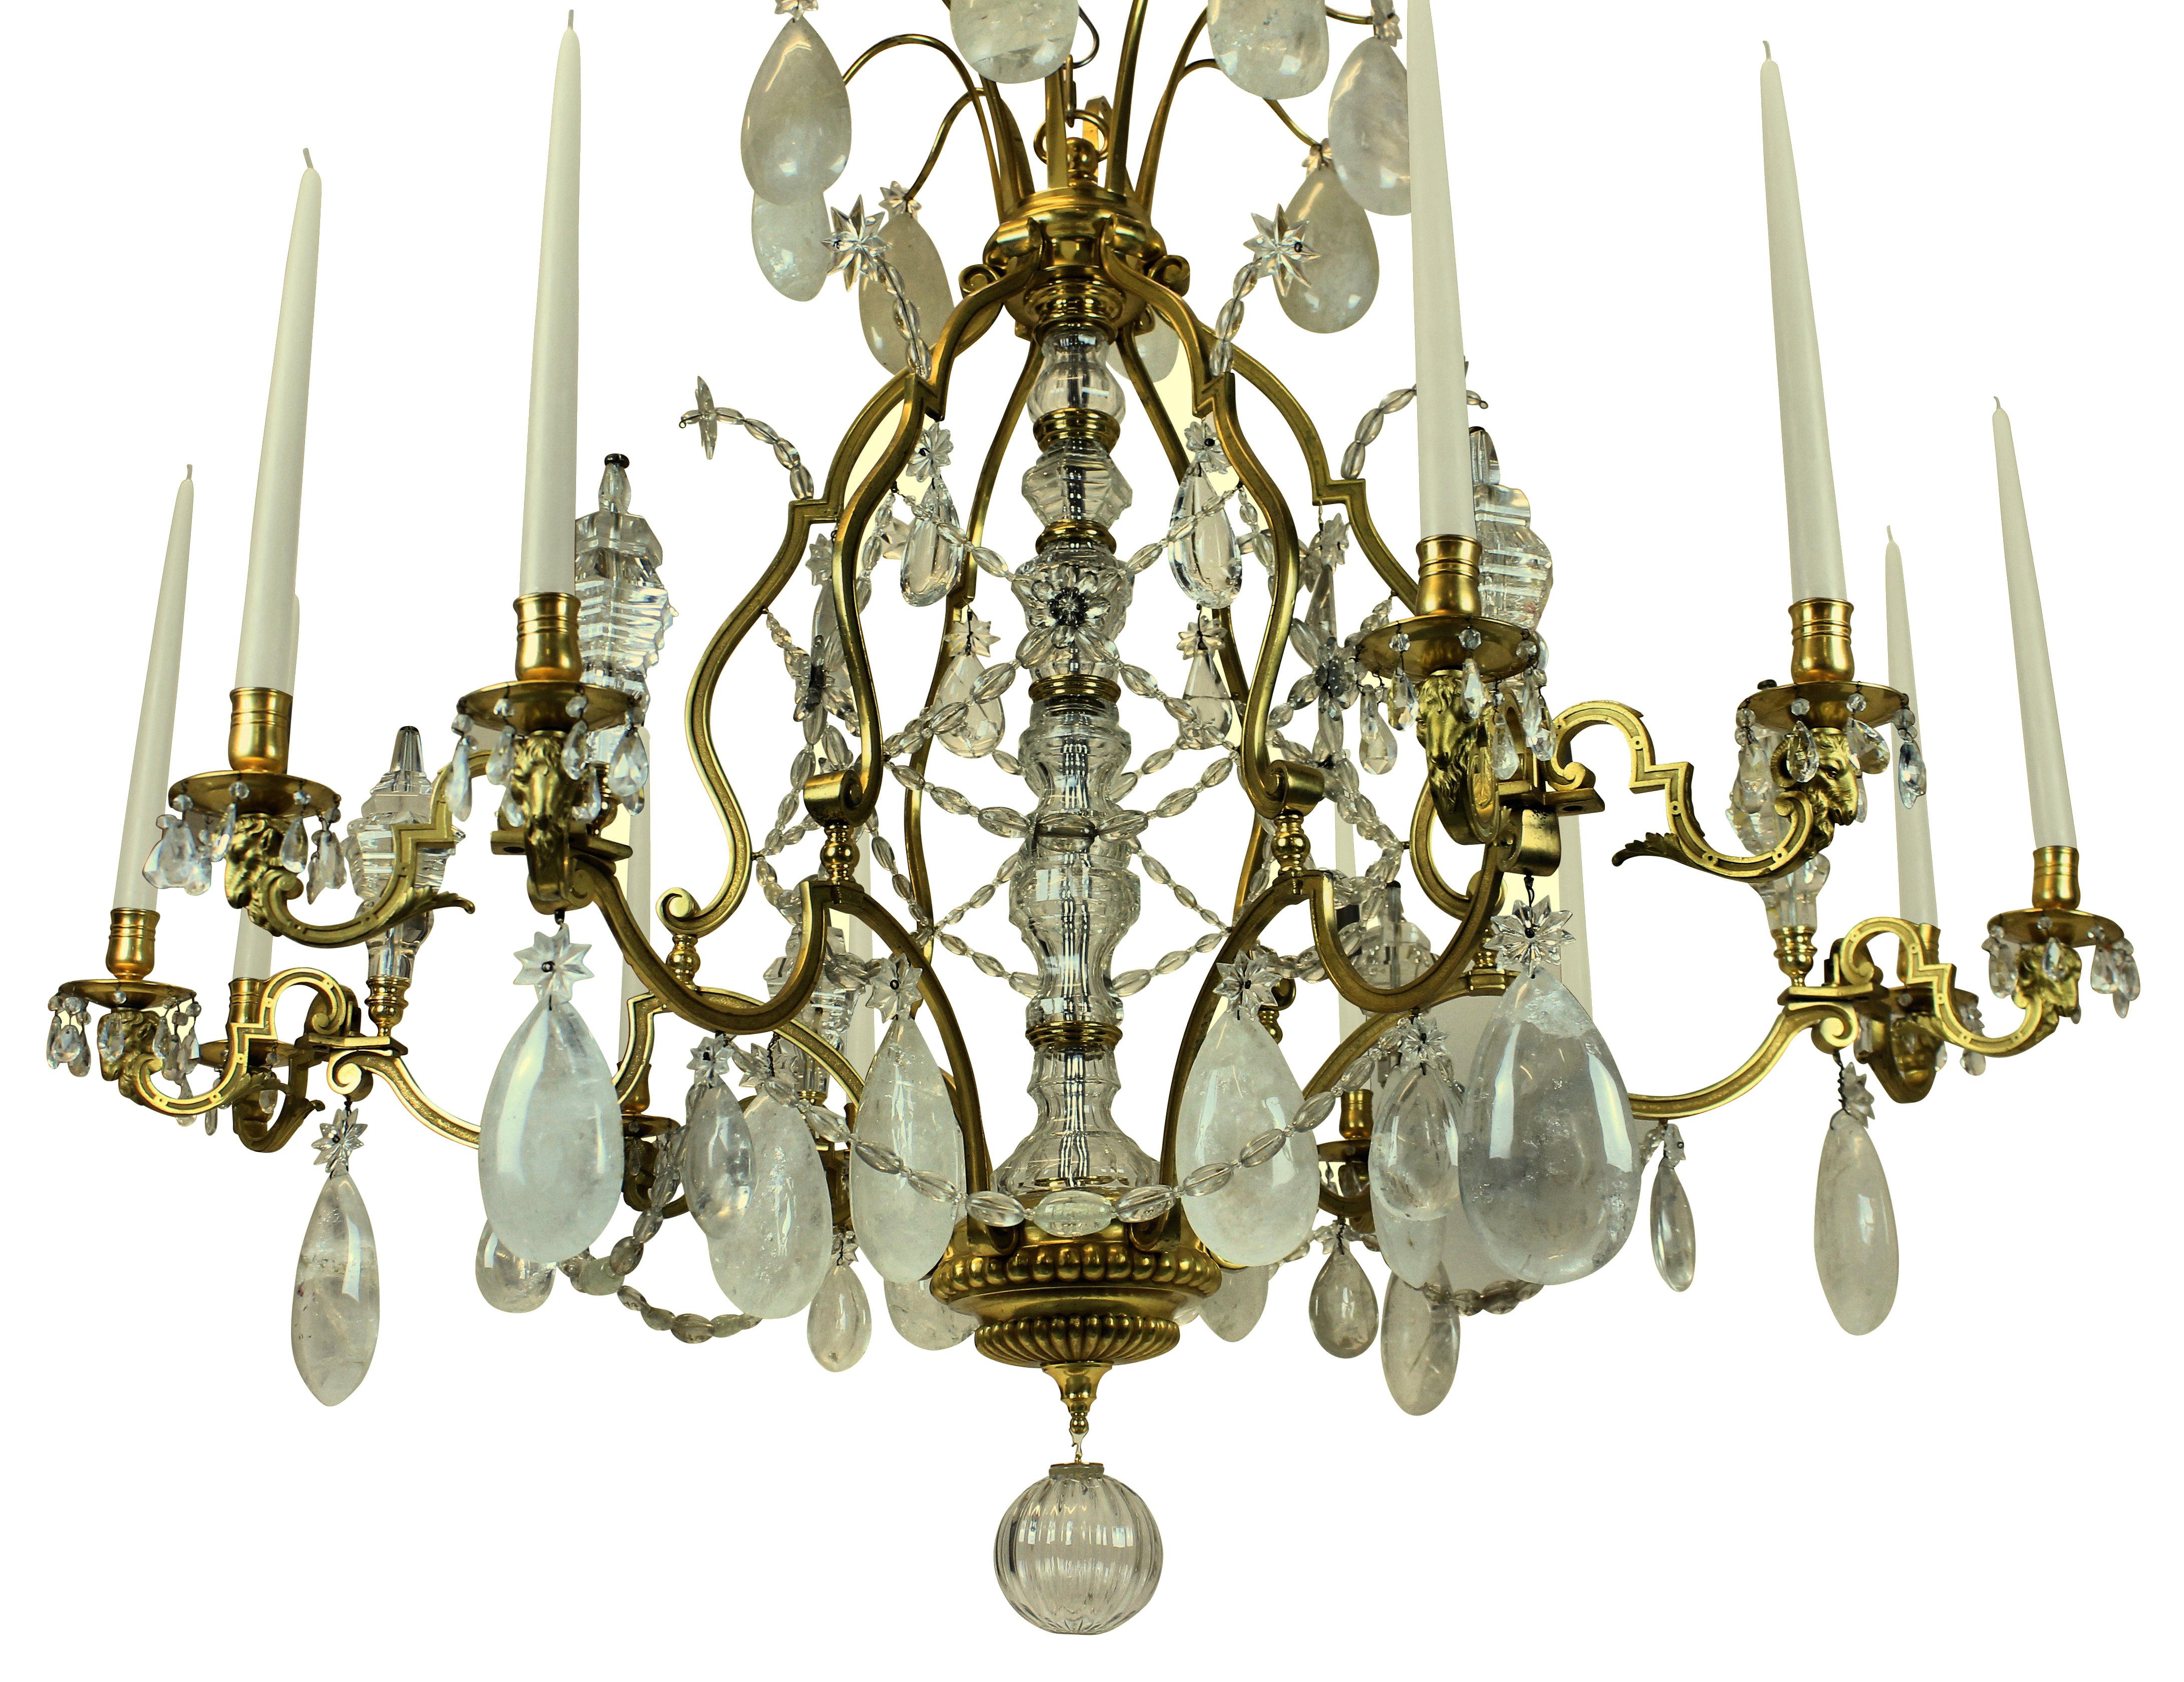 Louis XIV Large Louis XV Style Gilt Bronze and Rock Crystal Chandelier